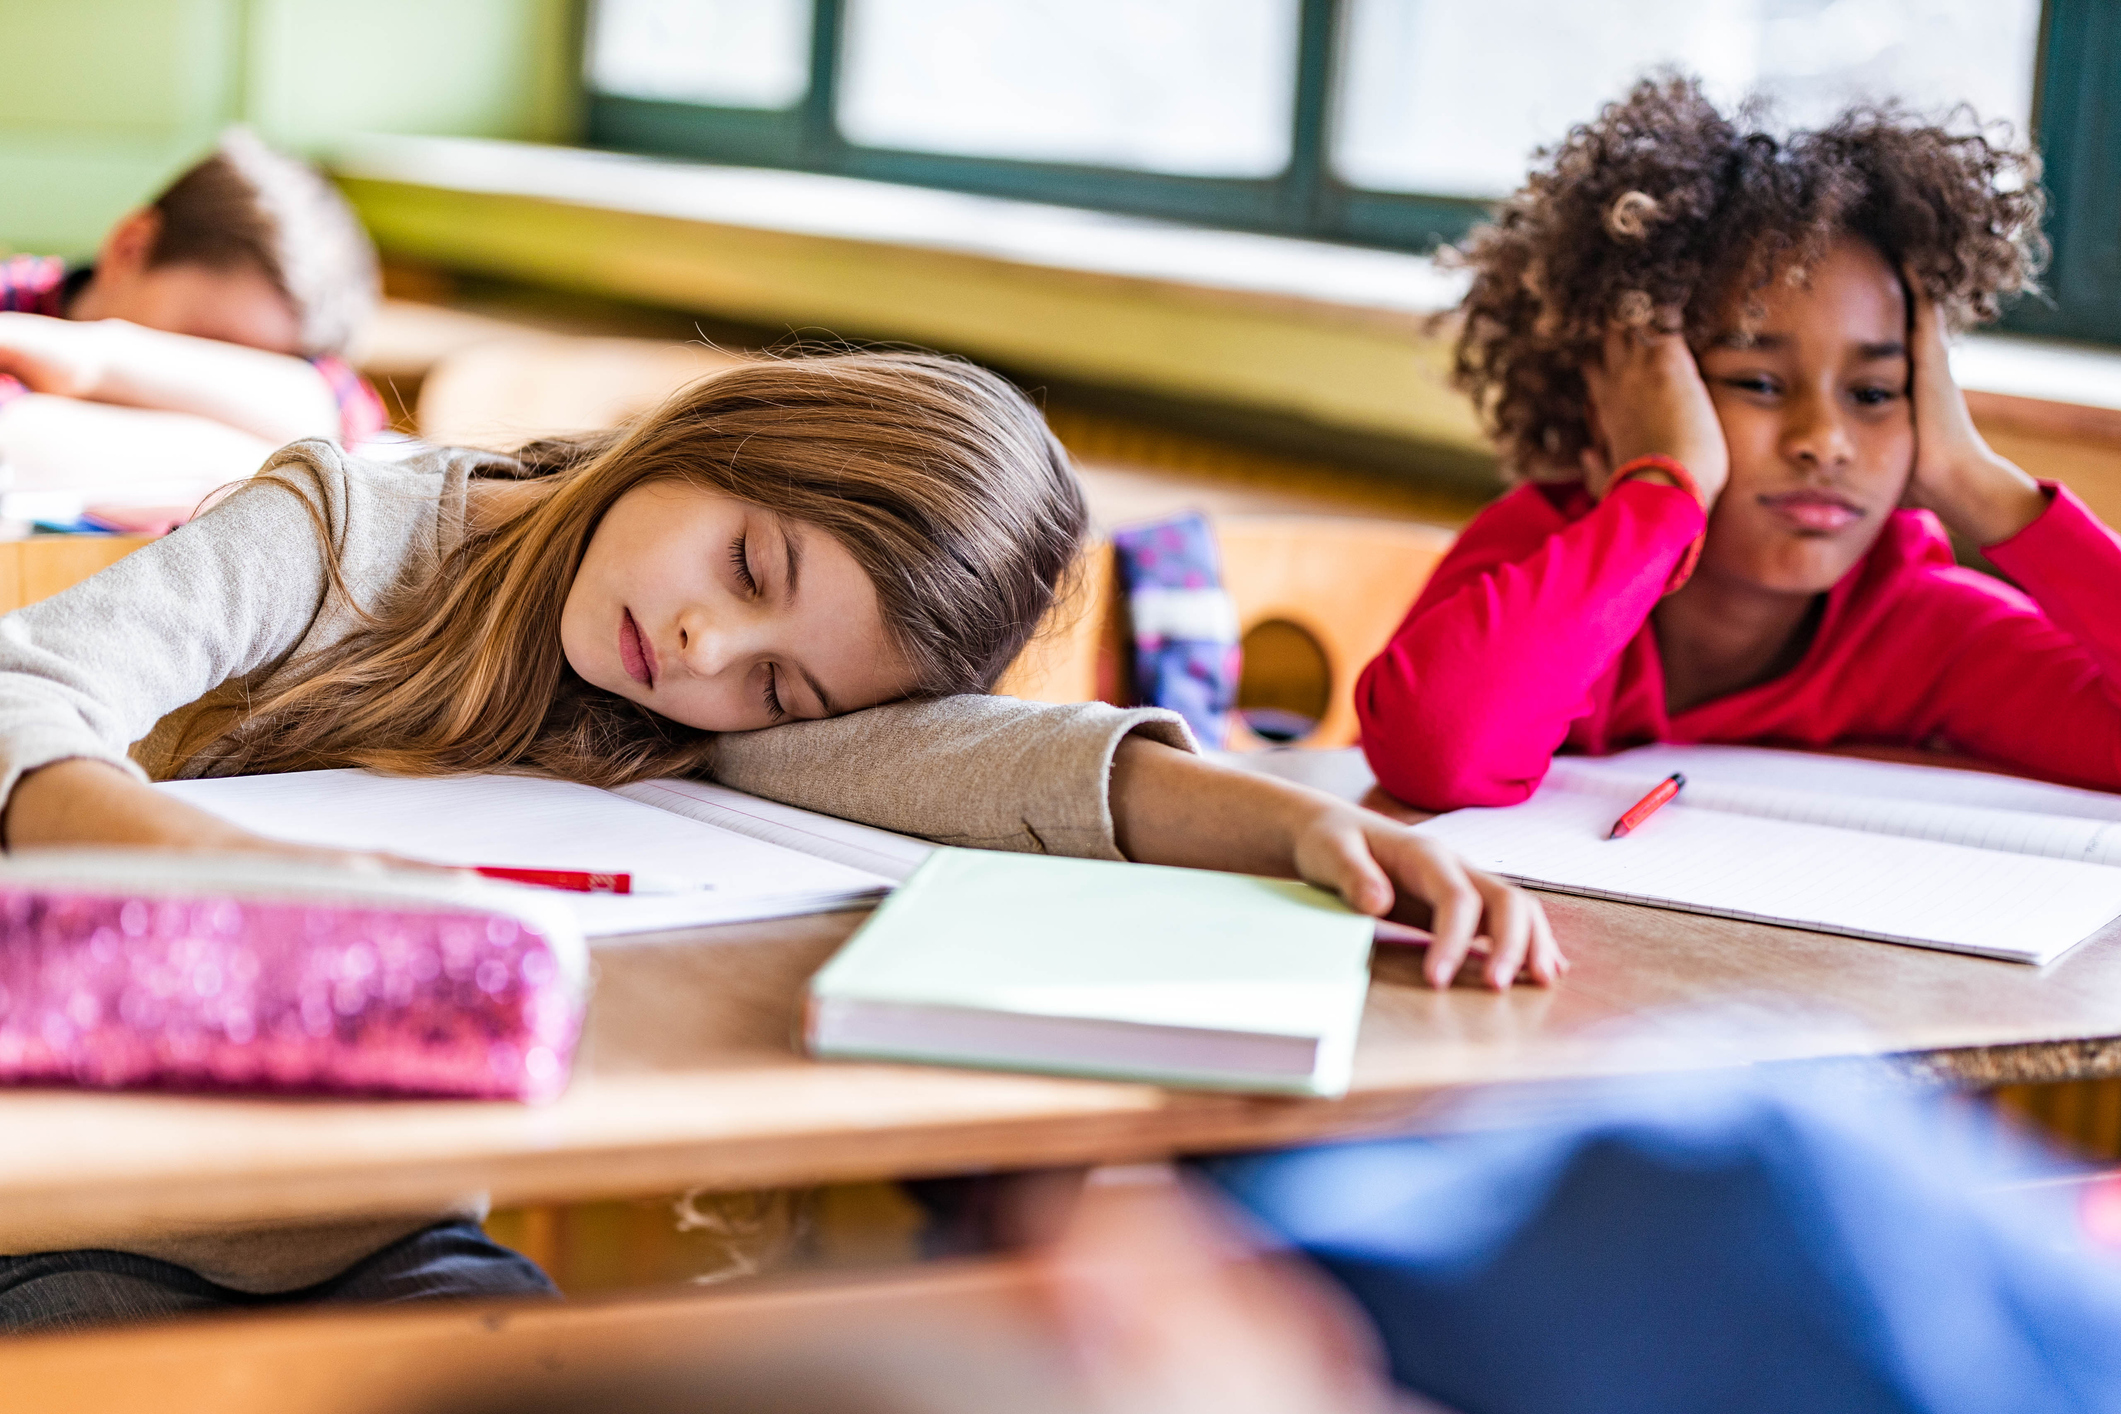 Three Health Consequences of Sleep Deprivation in Children